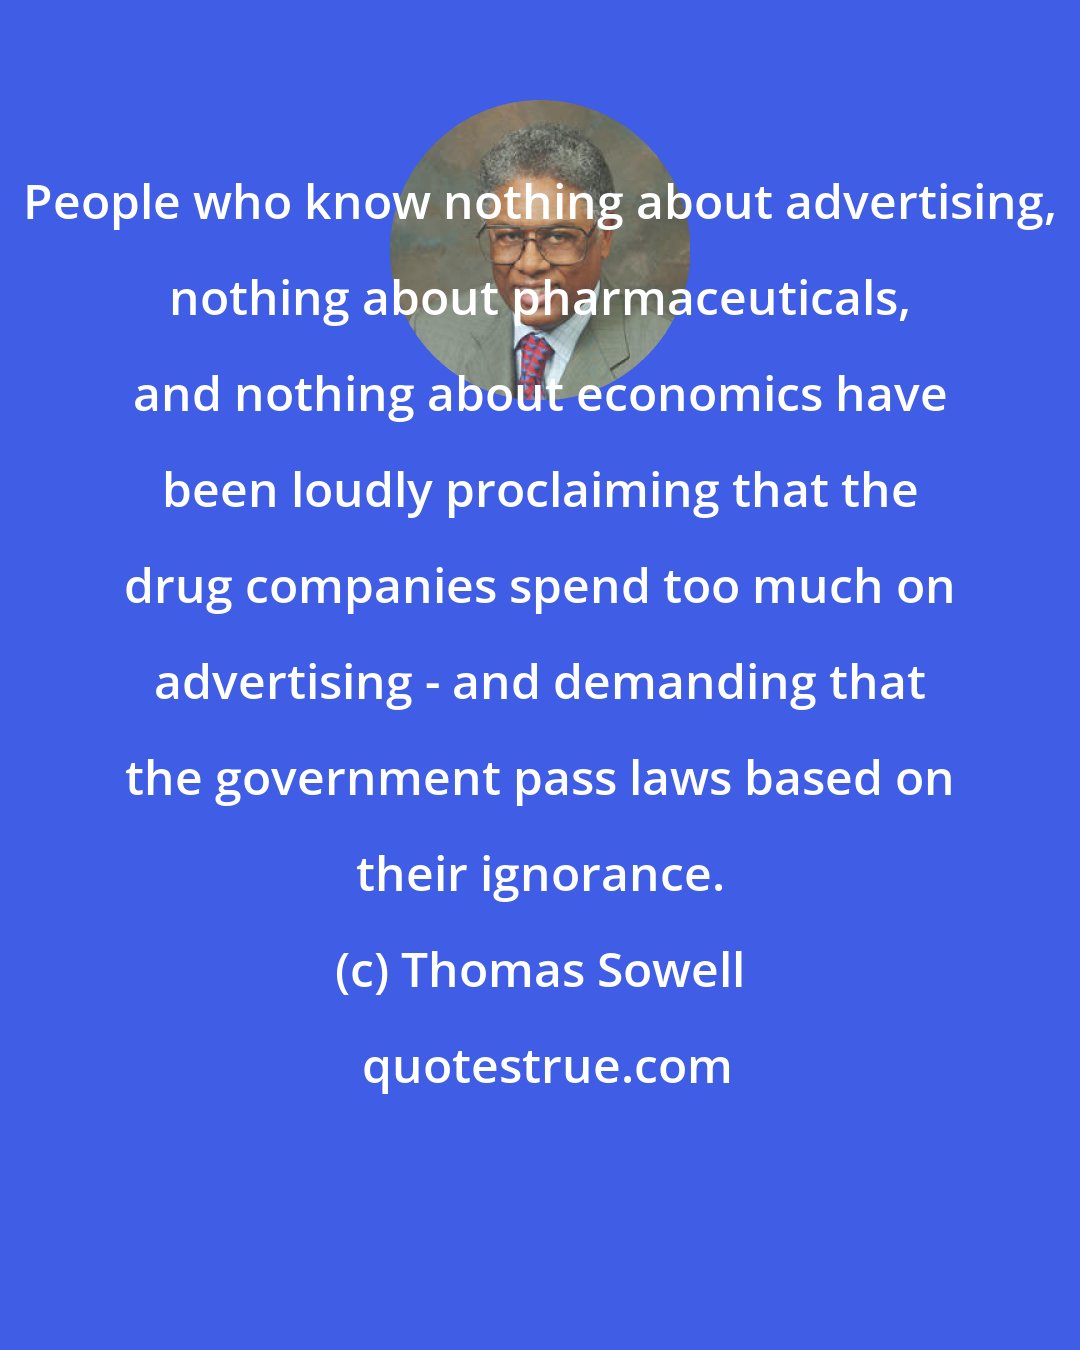 Thomas Sowell: People who know nothing about advertising, nothing about pharmaceuticals, and nothing about economics have been loudly proclaiming that the drug companies spend too much on advertising - and demanding that the government pass laws based on their ignorance.